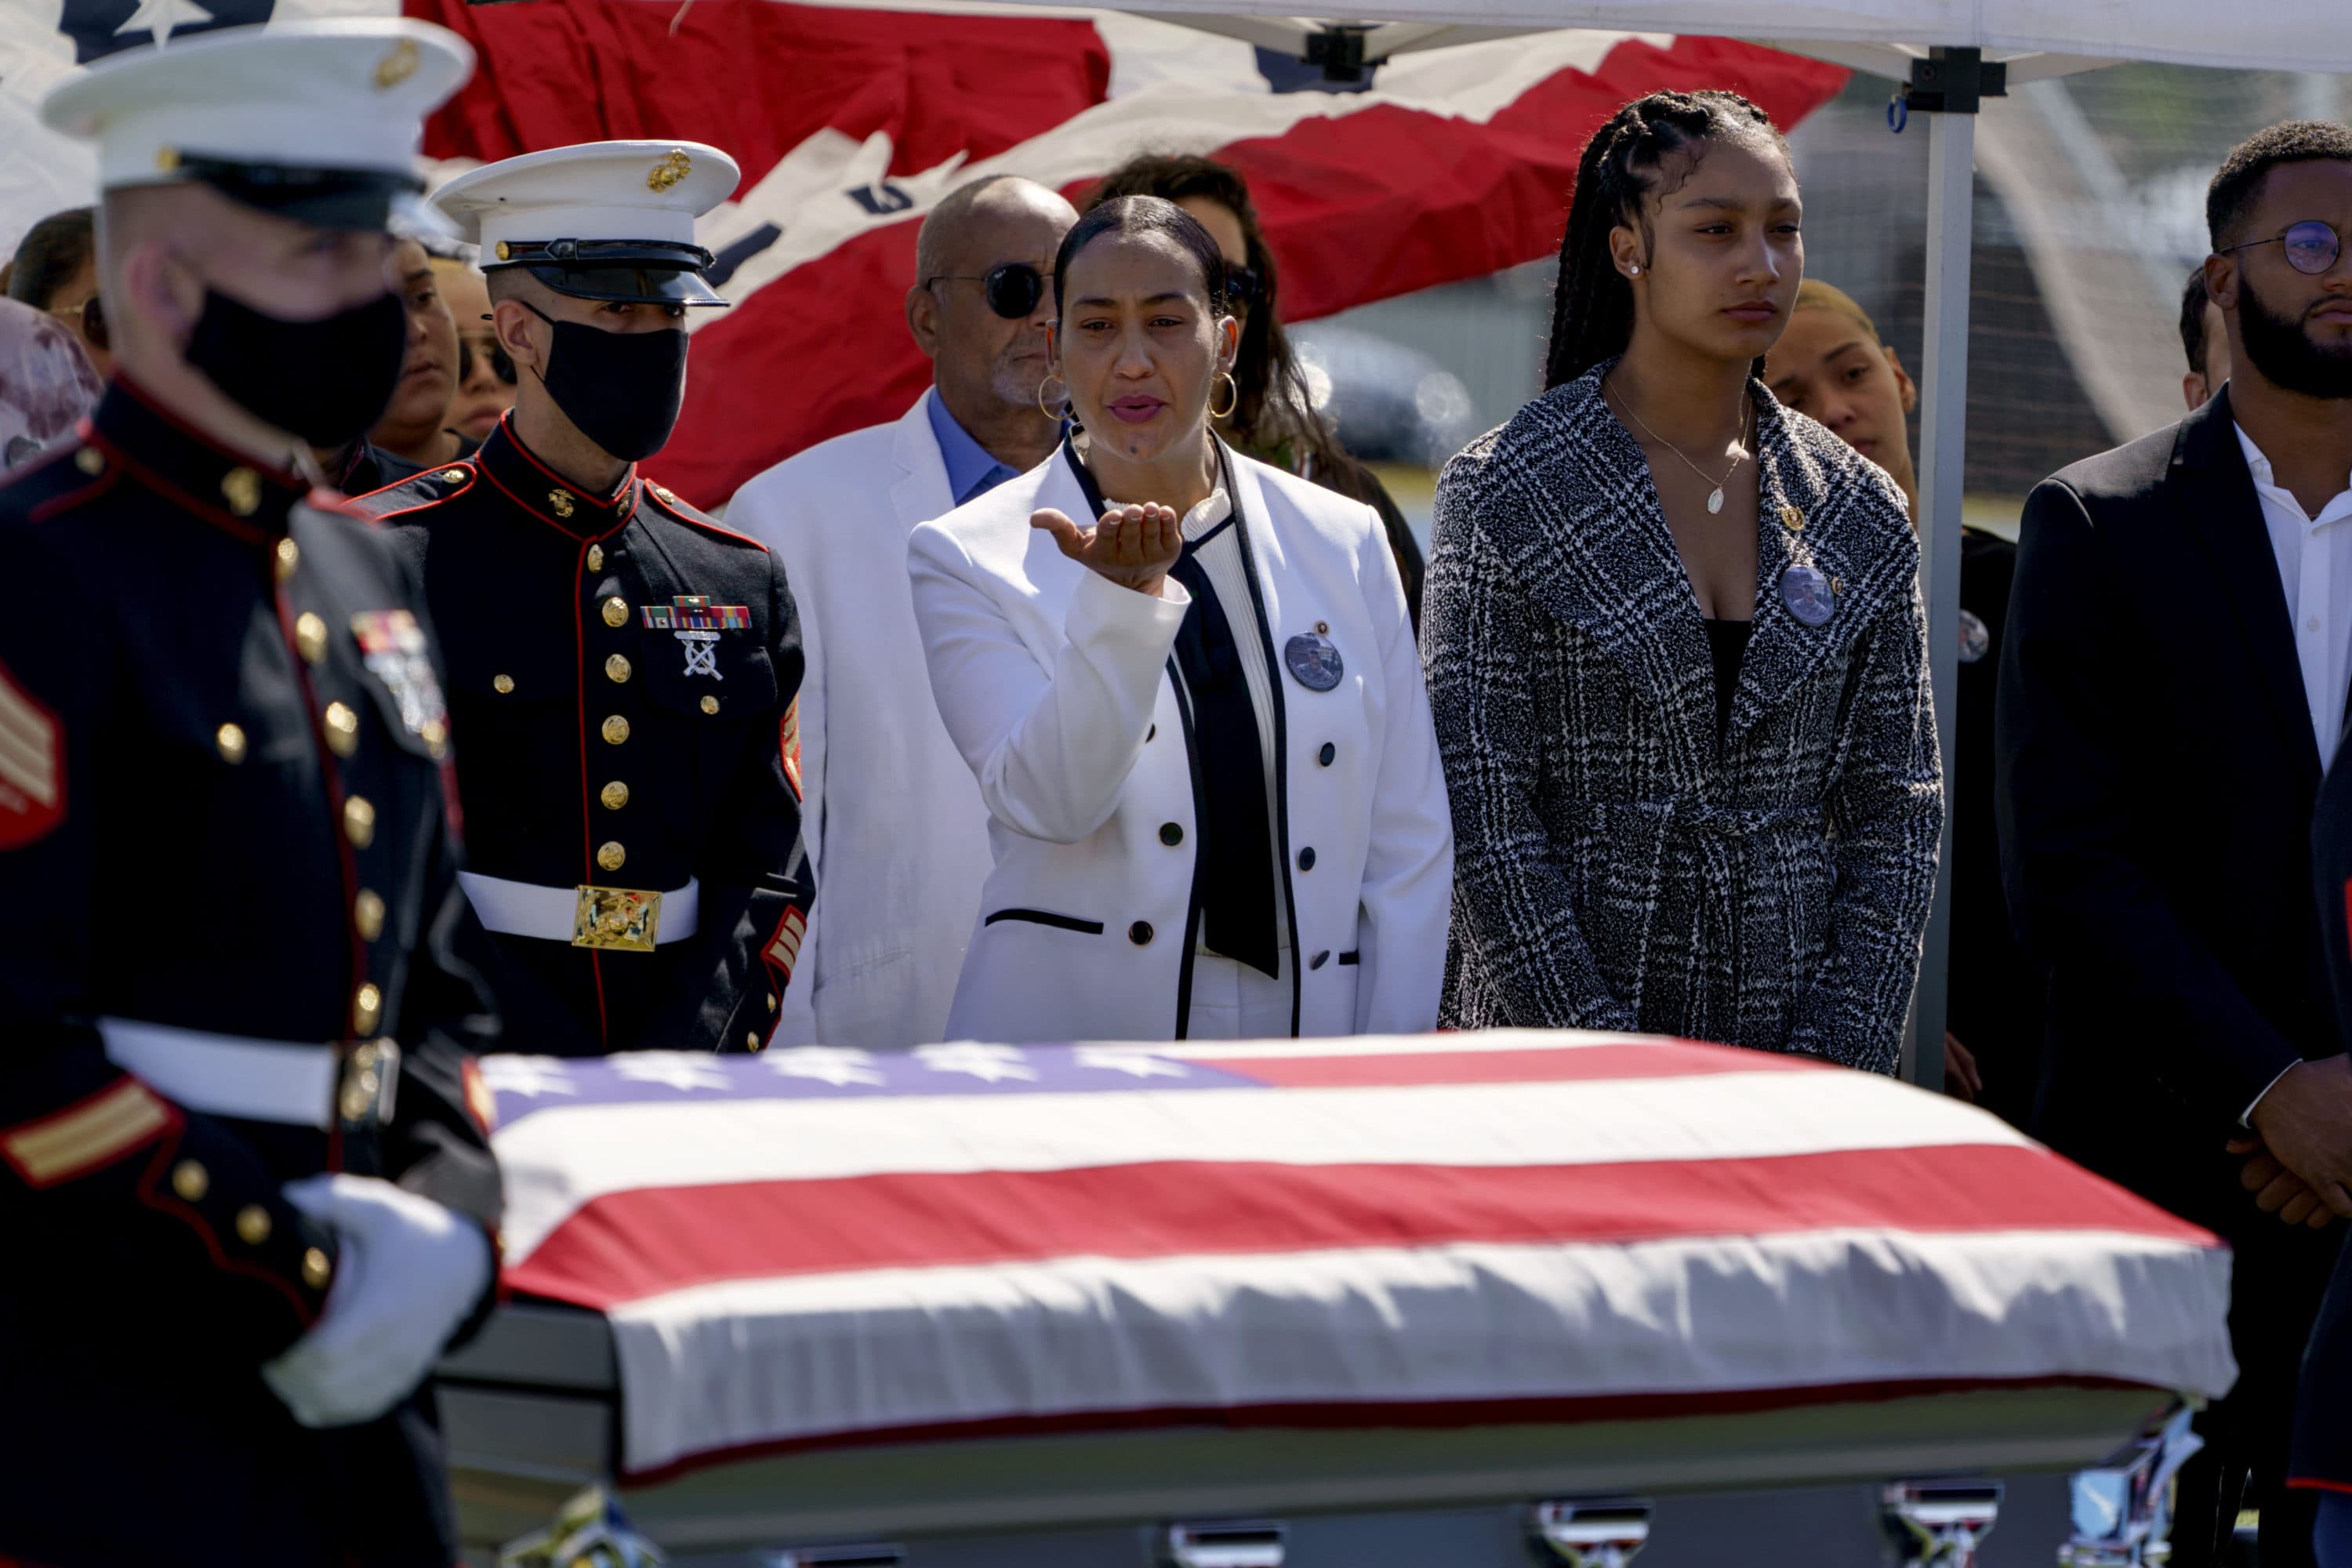 Colasa Pichardo, center, blows a kiss toward the casket of her daughter, Sgt. Johanny Rosario, a U.S. Marine who was among 13 service members killed in a suicide bombing in Afghanistan, during a public wake in her hometown of Lawrence on Tuesday. (David Goldman/AP)